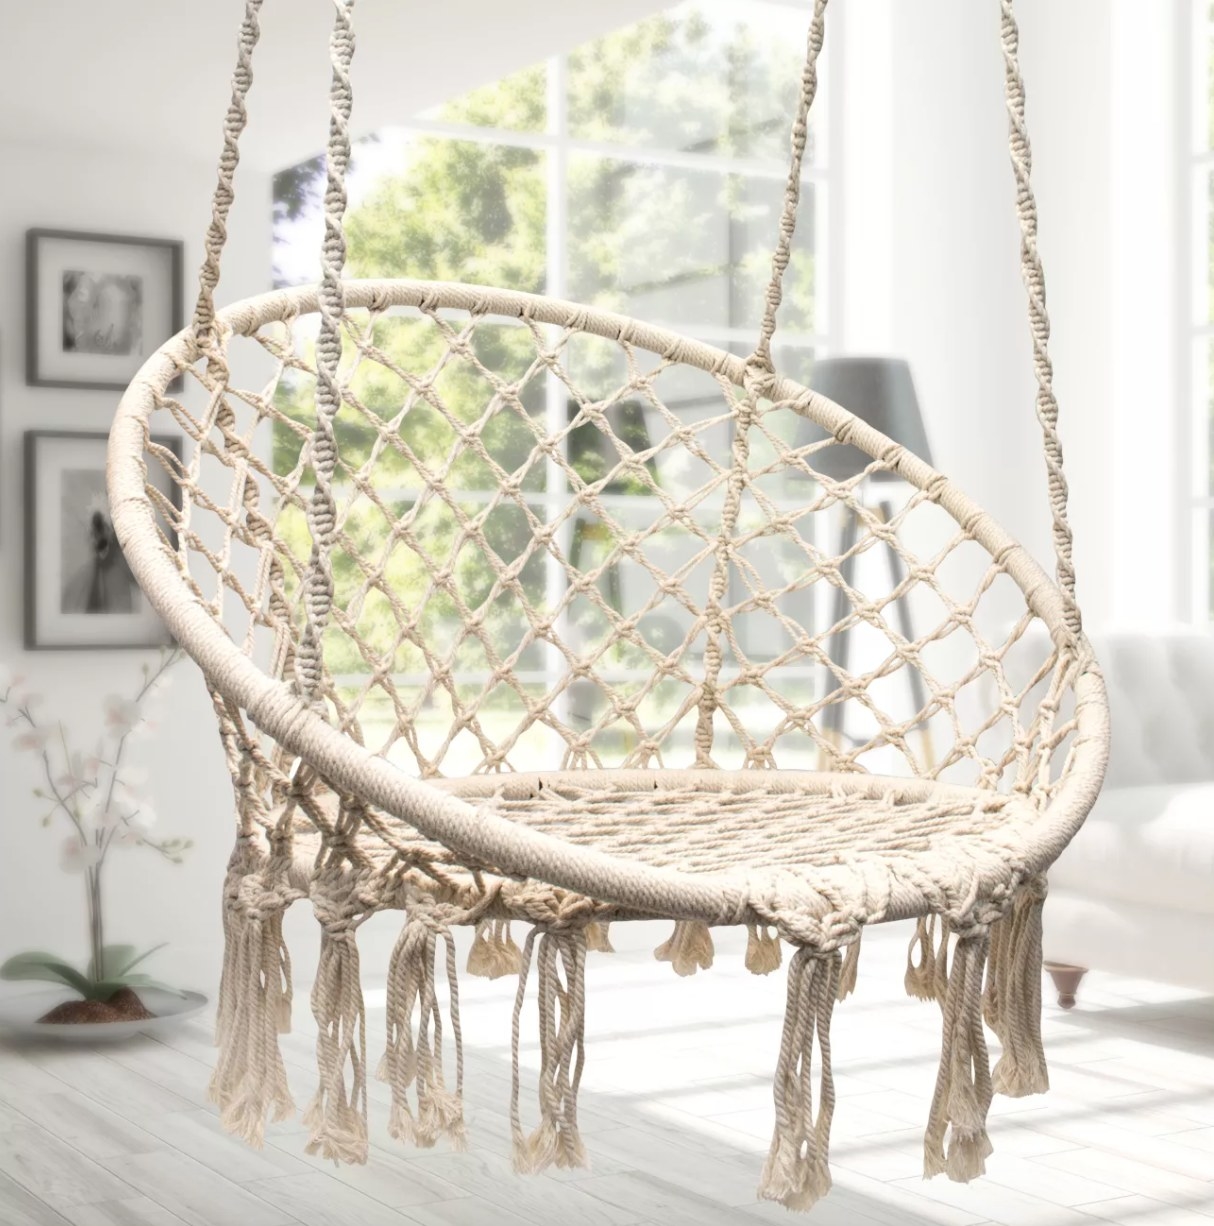 A white macrame hanging chair